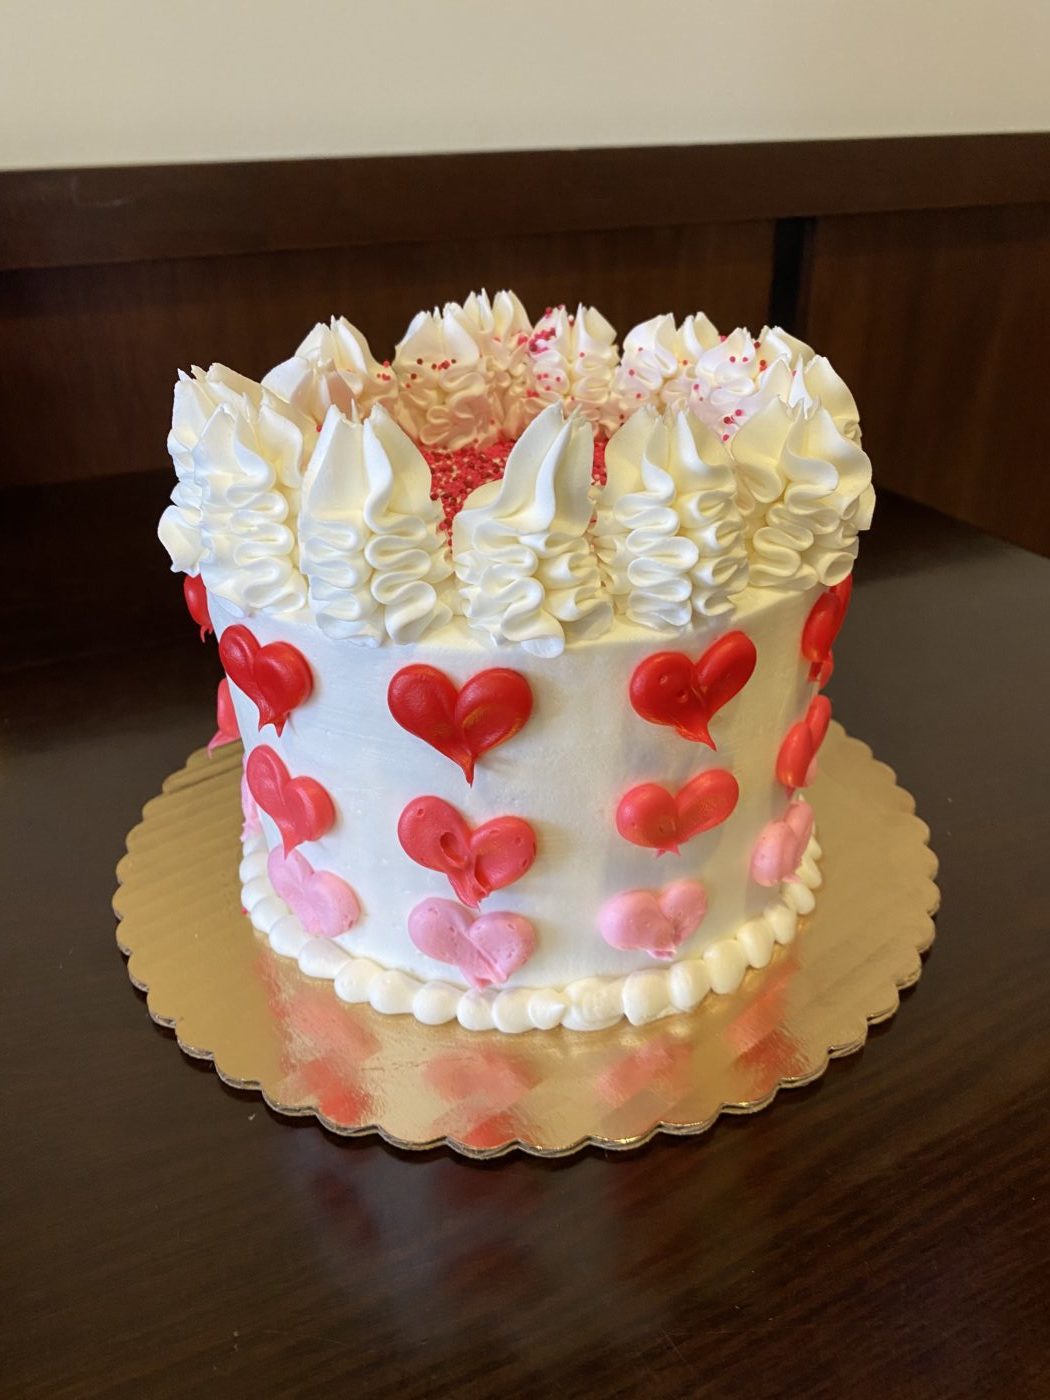 Decorate With Love This Valentine's Day - Three Brothers Bakery